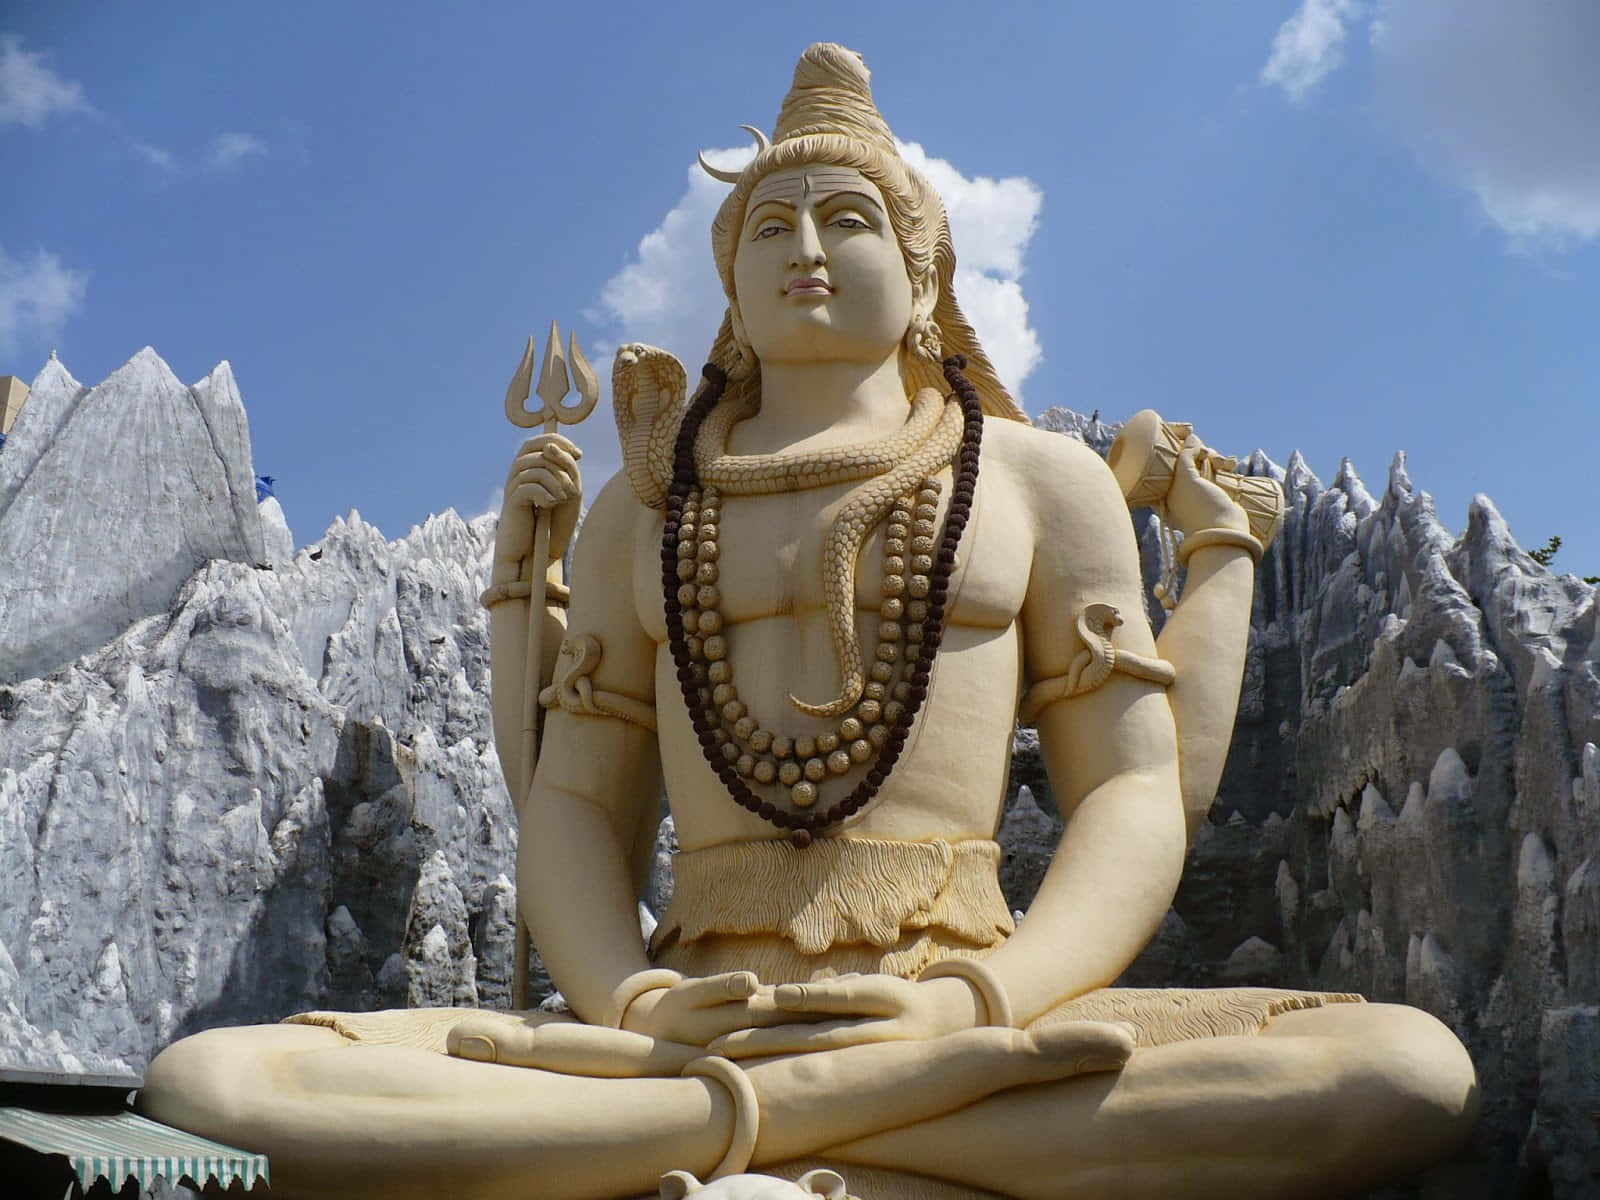 A Statue Of Lord Shiva In Front Of Mountains